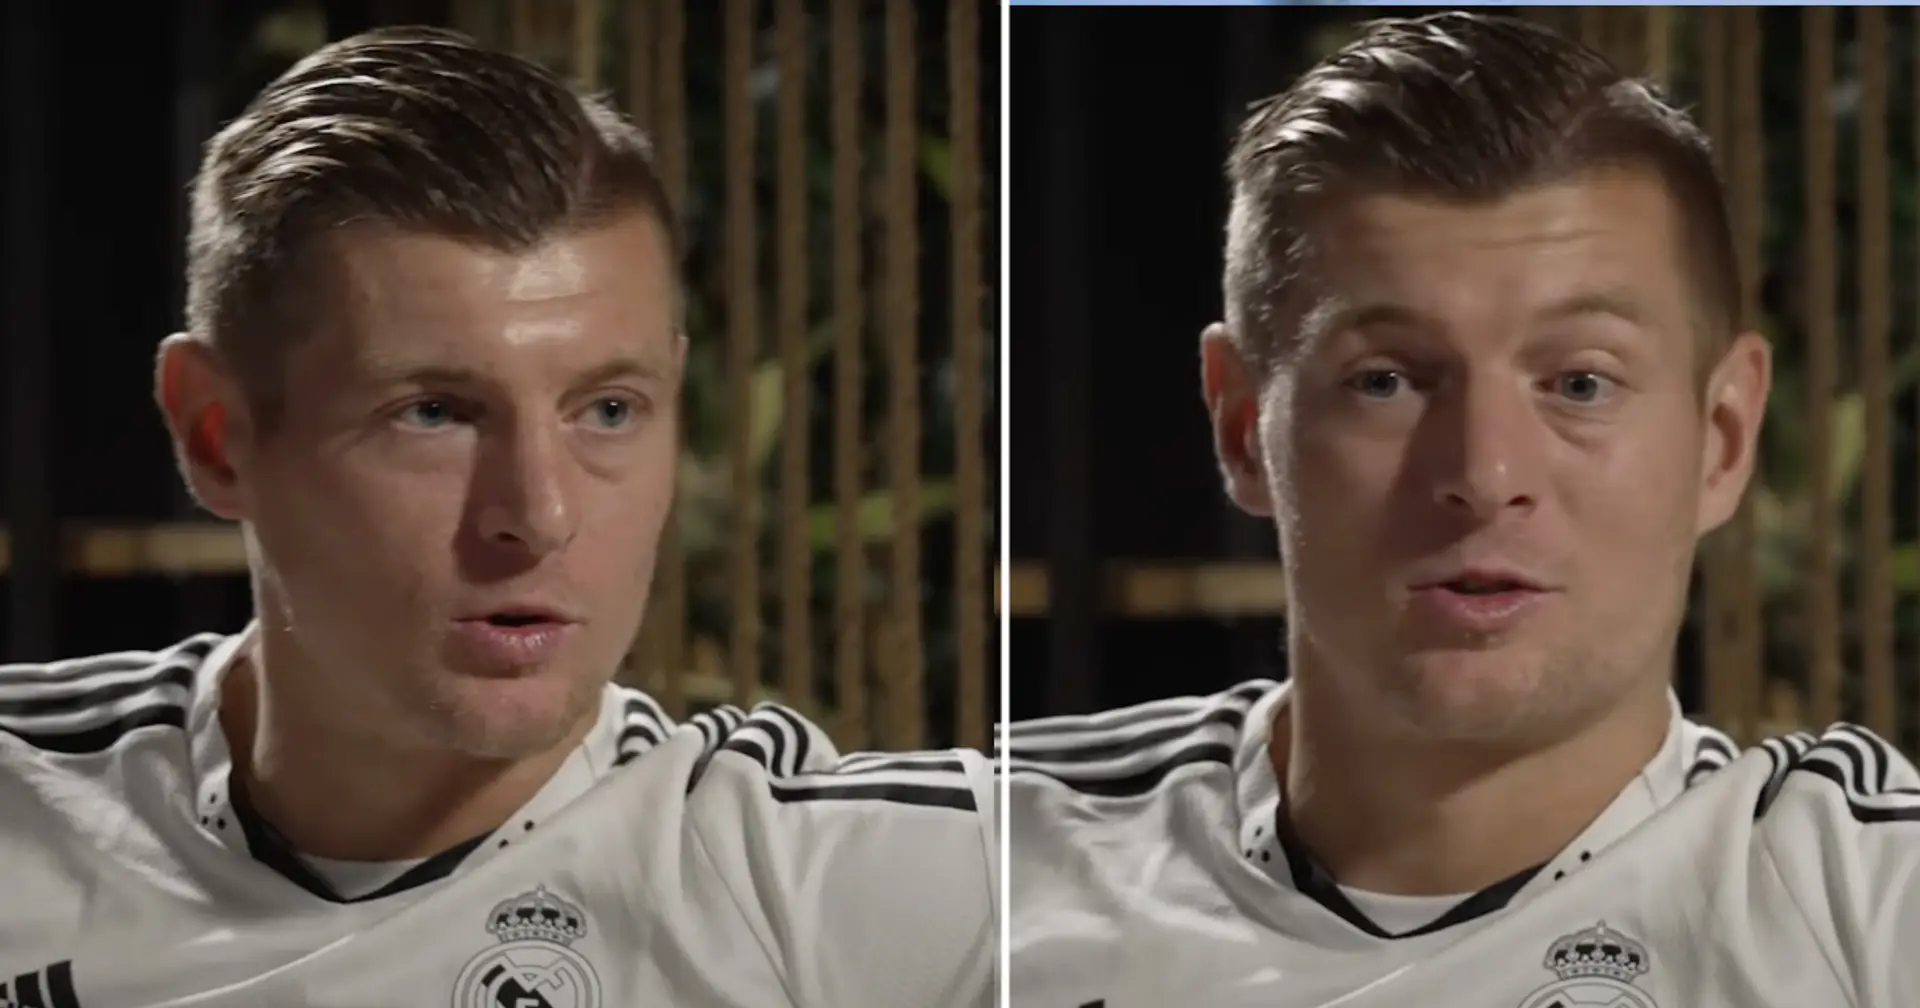 Toni Kroos sets main goal for what could be his last season at Real Madrid